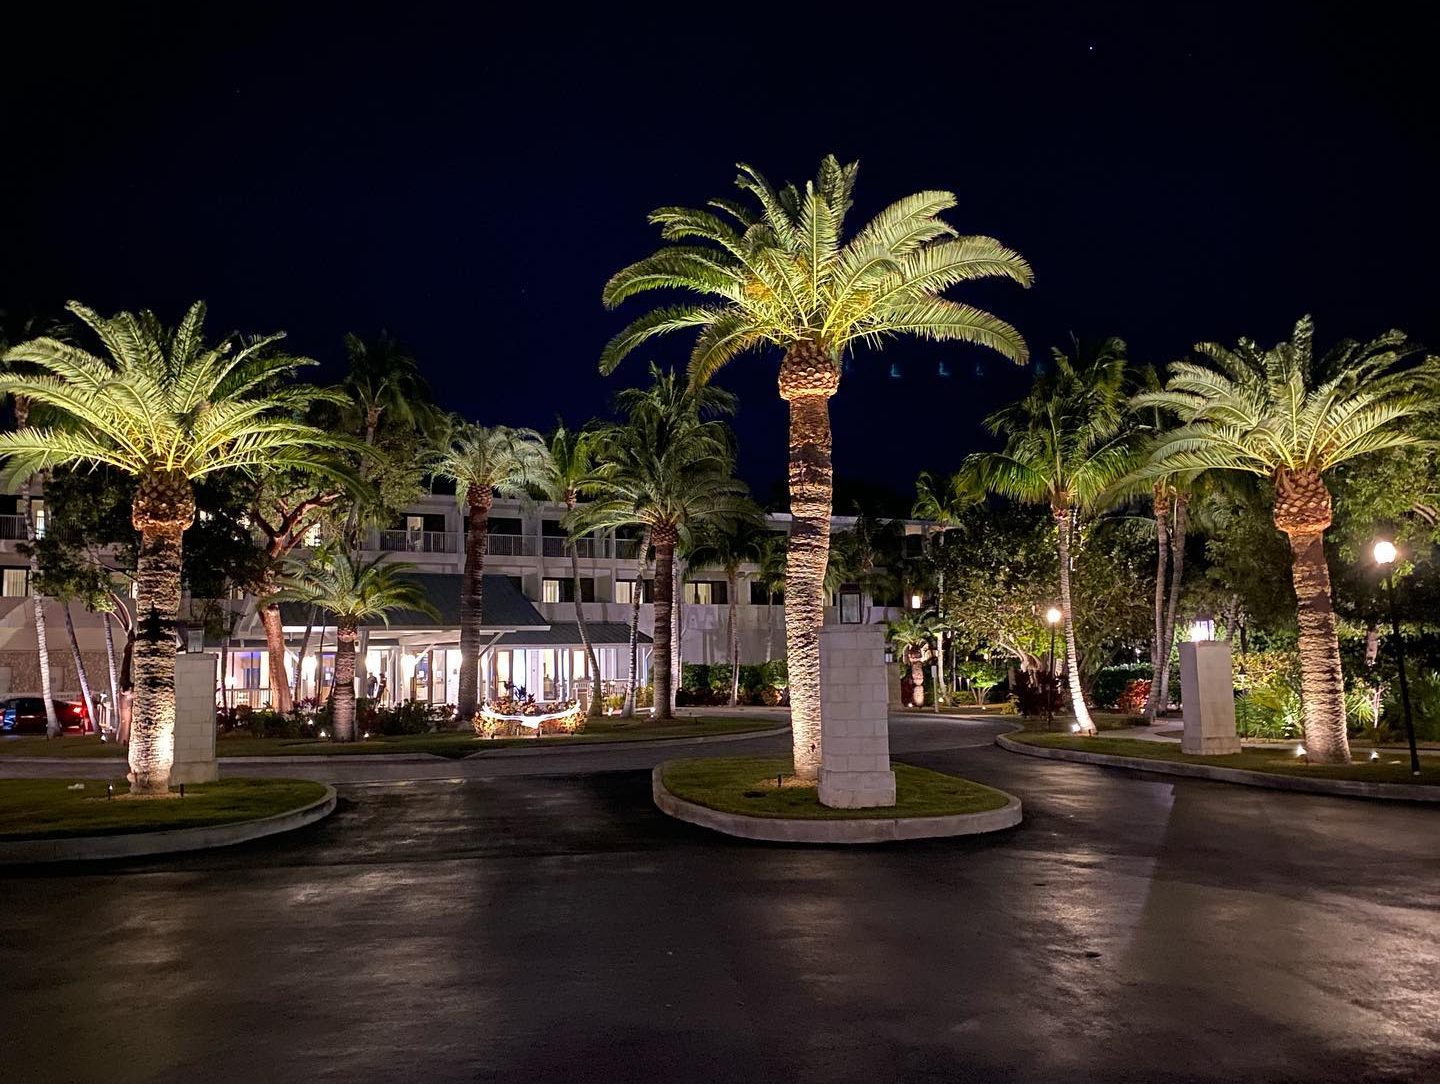 Contact us for outdoor lighting services near Orlando FL